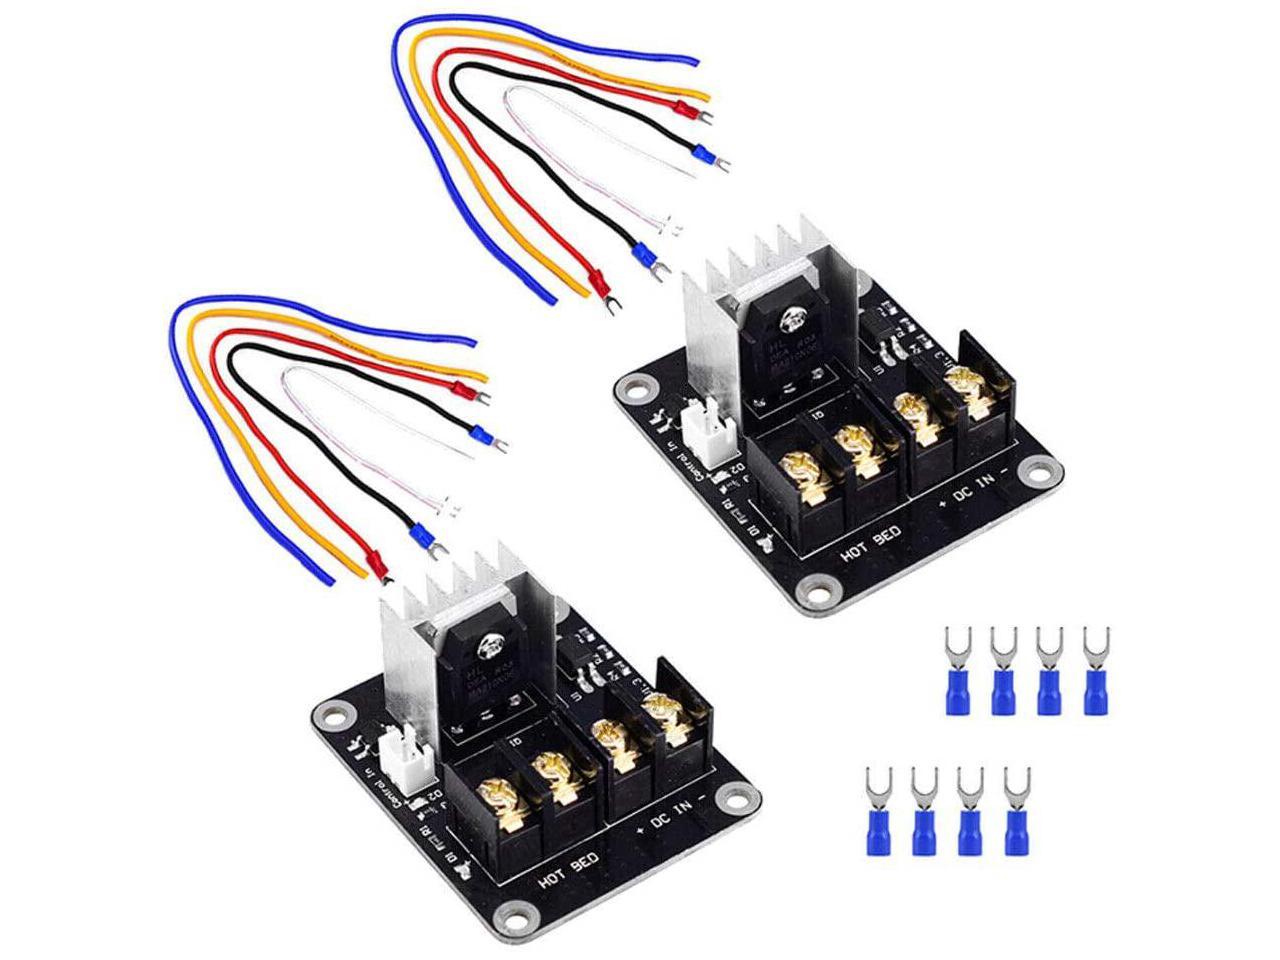 2pcs ANET A8 MOSFET Board Upgrade 3D Printer Heated Bed Power Module i3 sdsrfefr 